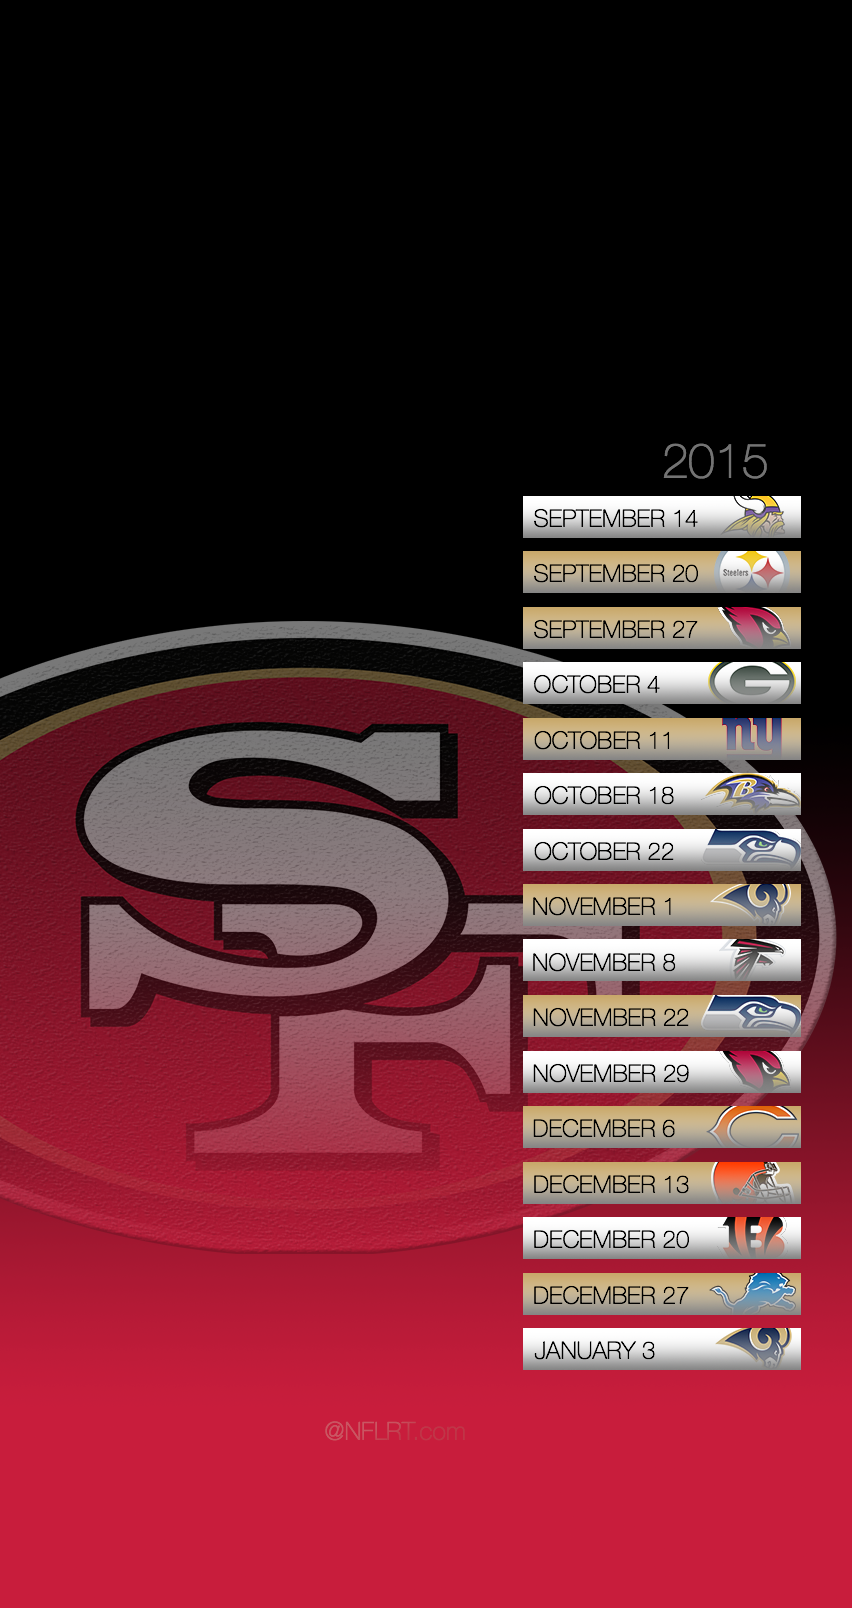 2015 NFL Schedule Wallpapers - Page 8 of 8 - @NFLRT